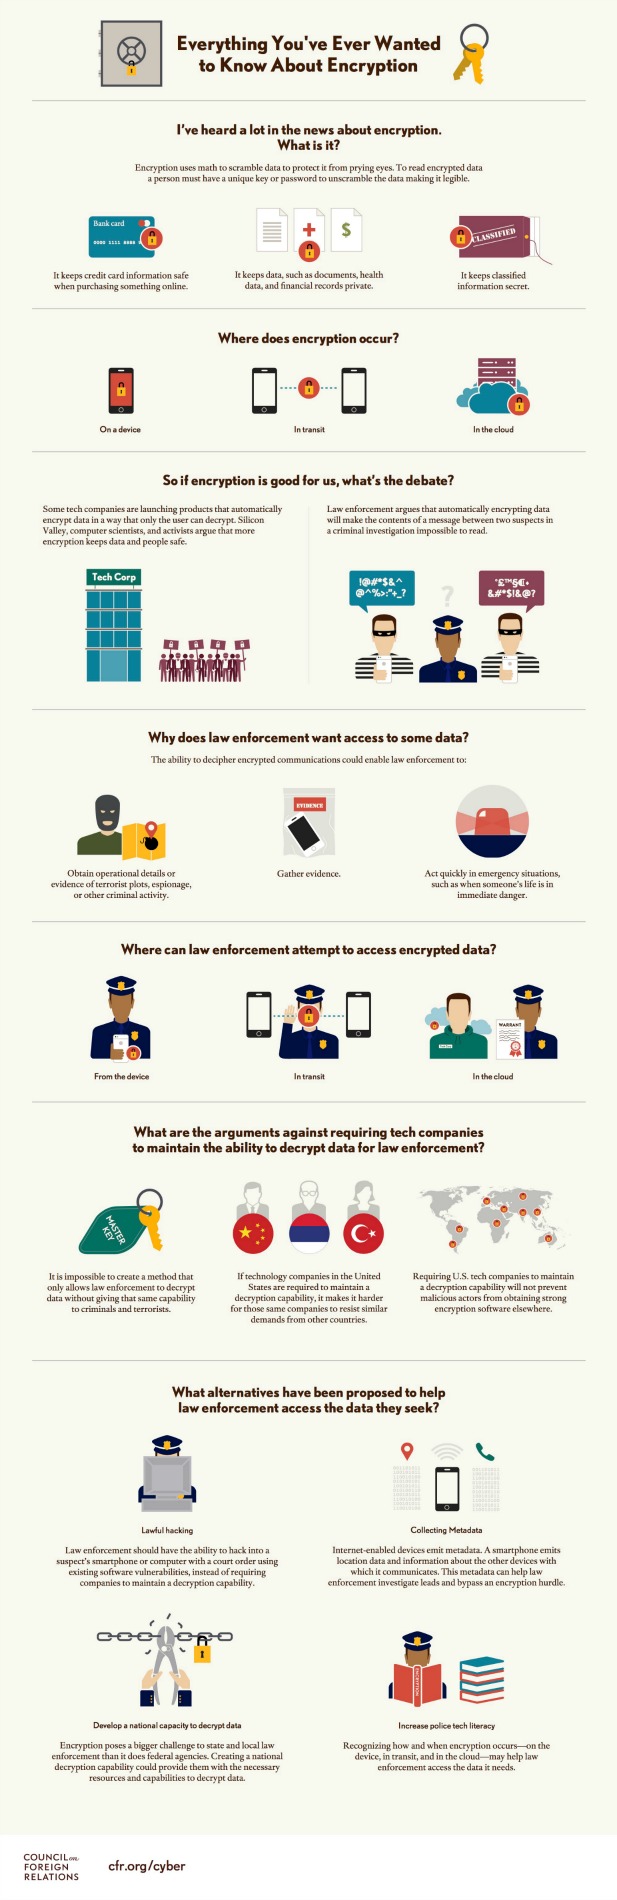 Encryption Explained: A Council on Foreign Relations Infographic